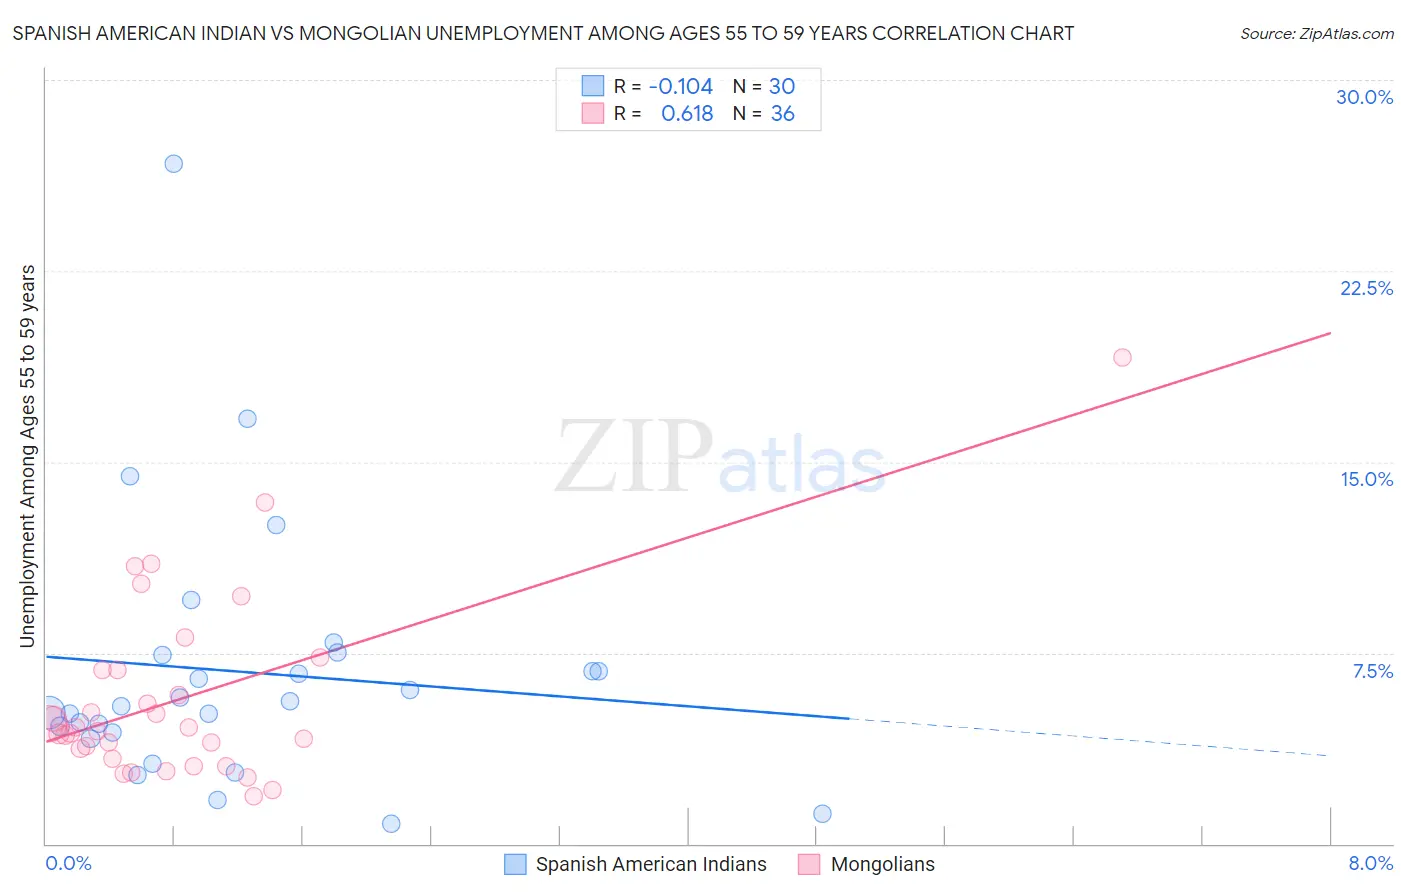 Spanish American Indian vs Mongolian Unemployment Among Ages 55 to 59 years